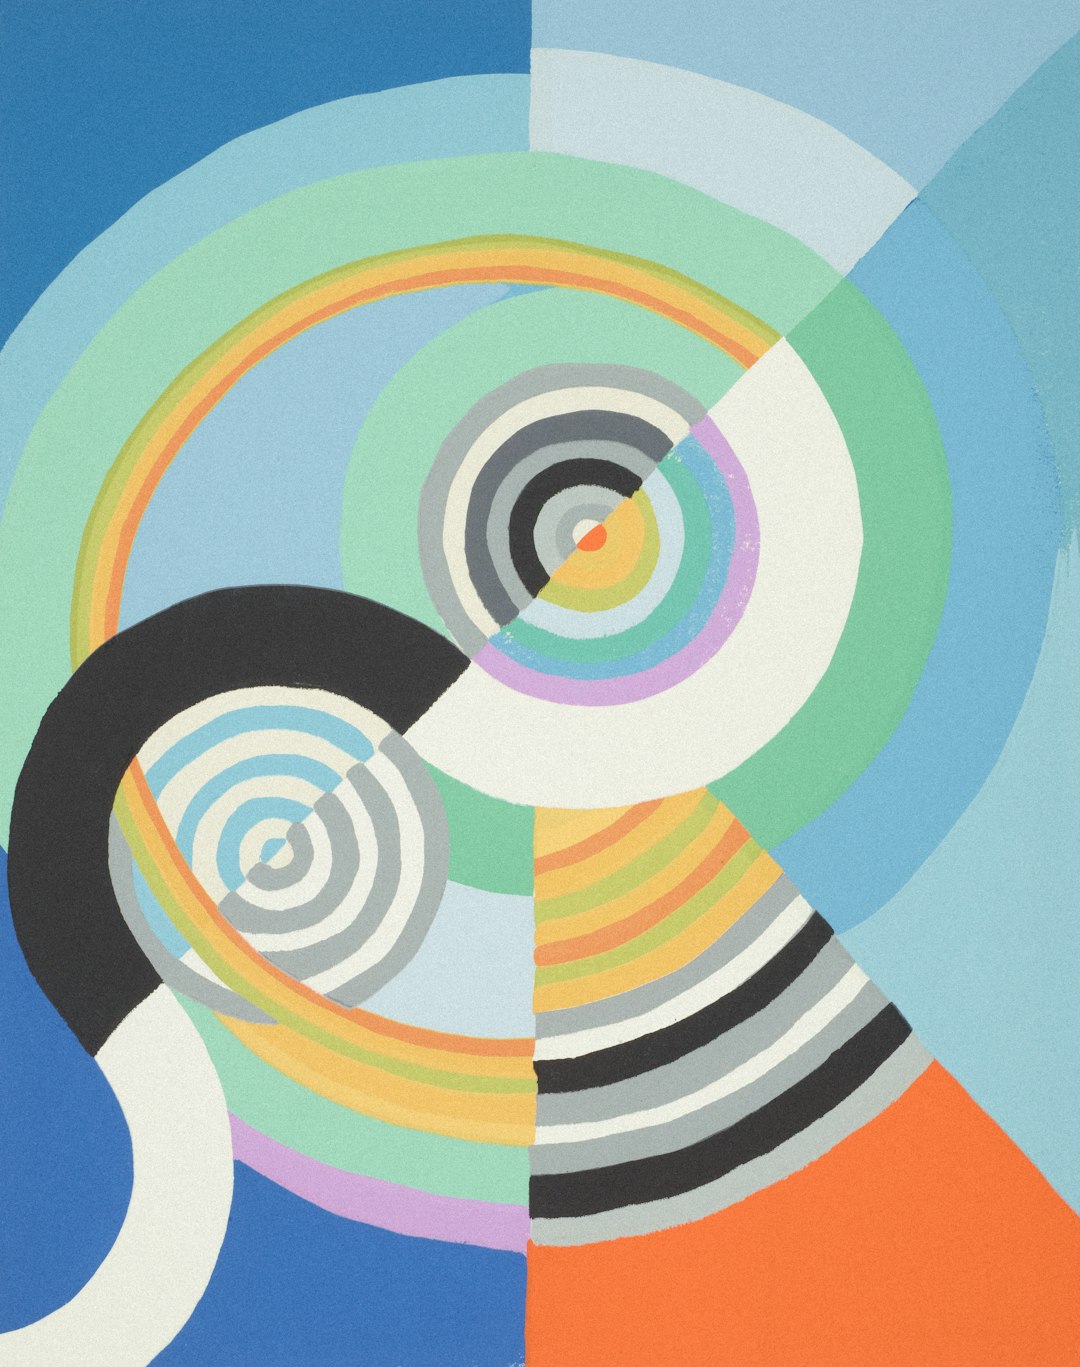 Rythme/3., 1938, France, by Robert Delaunay, Atelier Arcay. Bequest of Judge Julius Isaacs, New York, 1983. Te Papa (1983-0032-251/3-16)